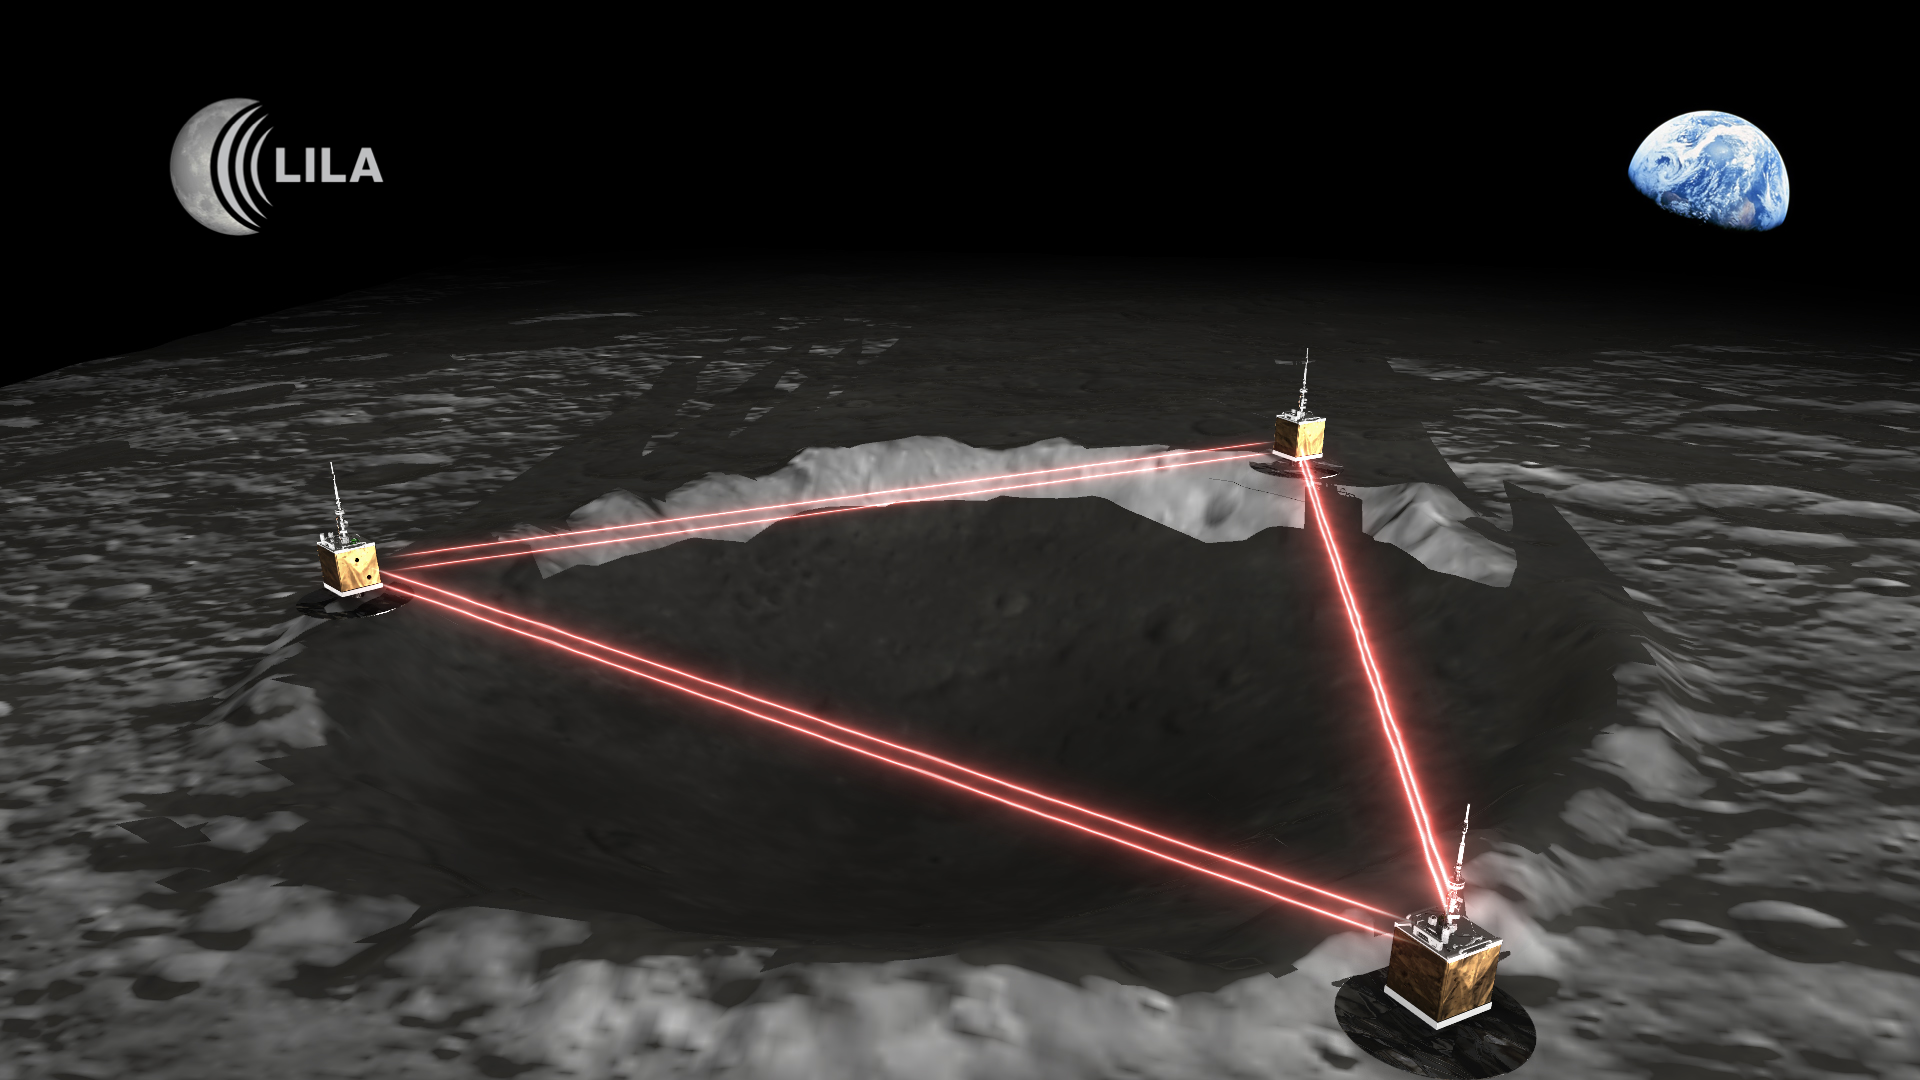 Three hubs straddle the edge of a large crater, with lasers connecting them at each point to form a triangle.